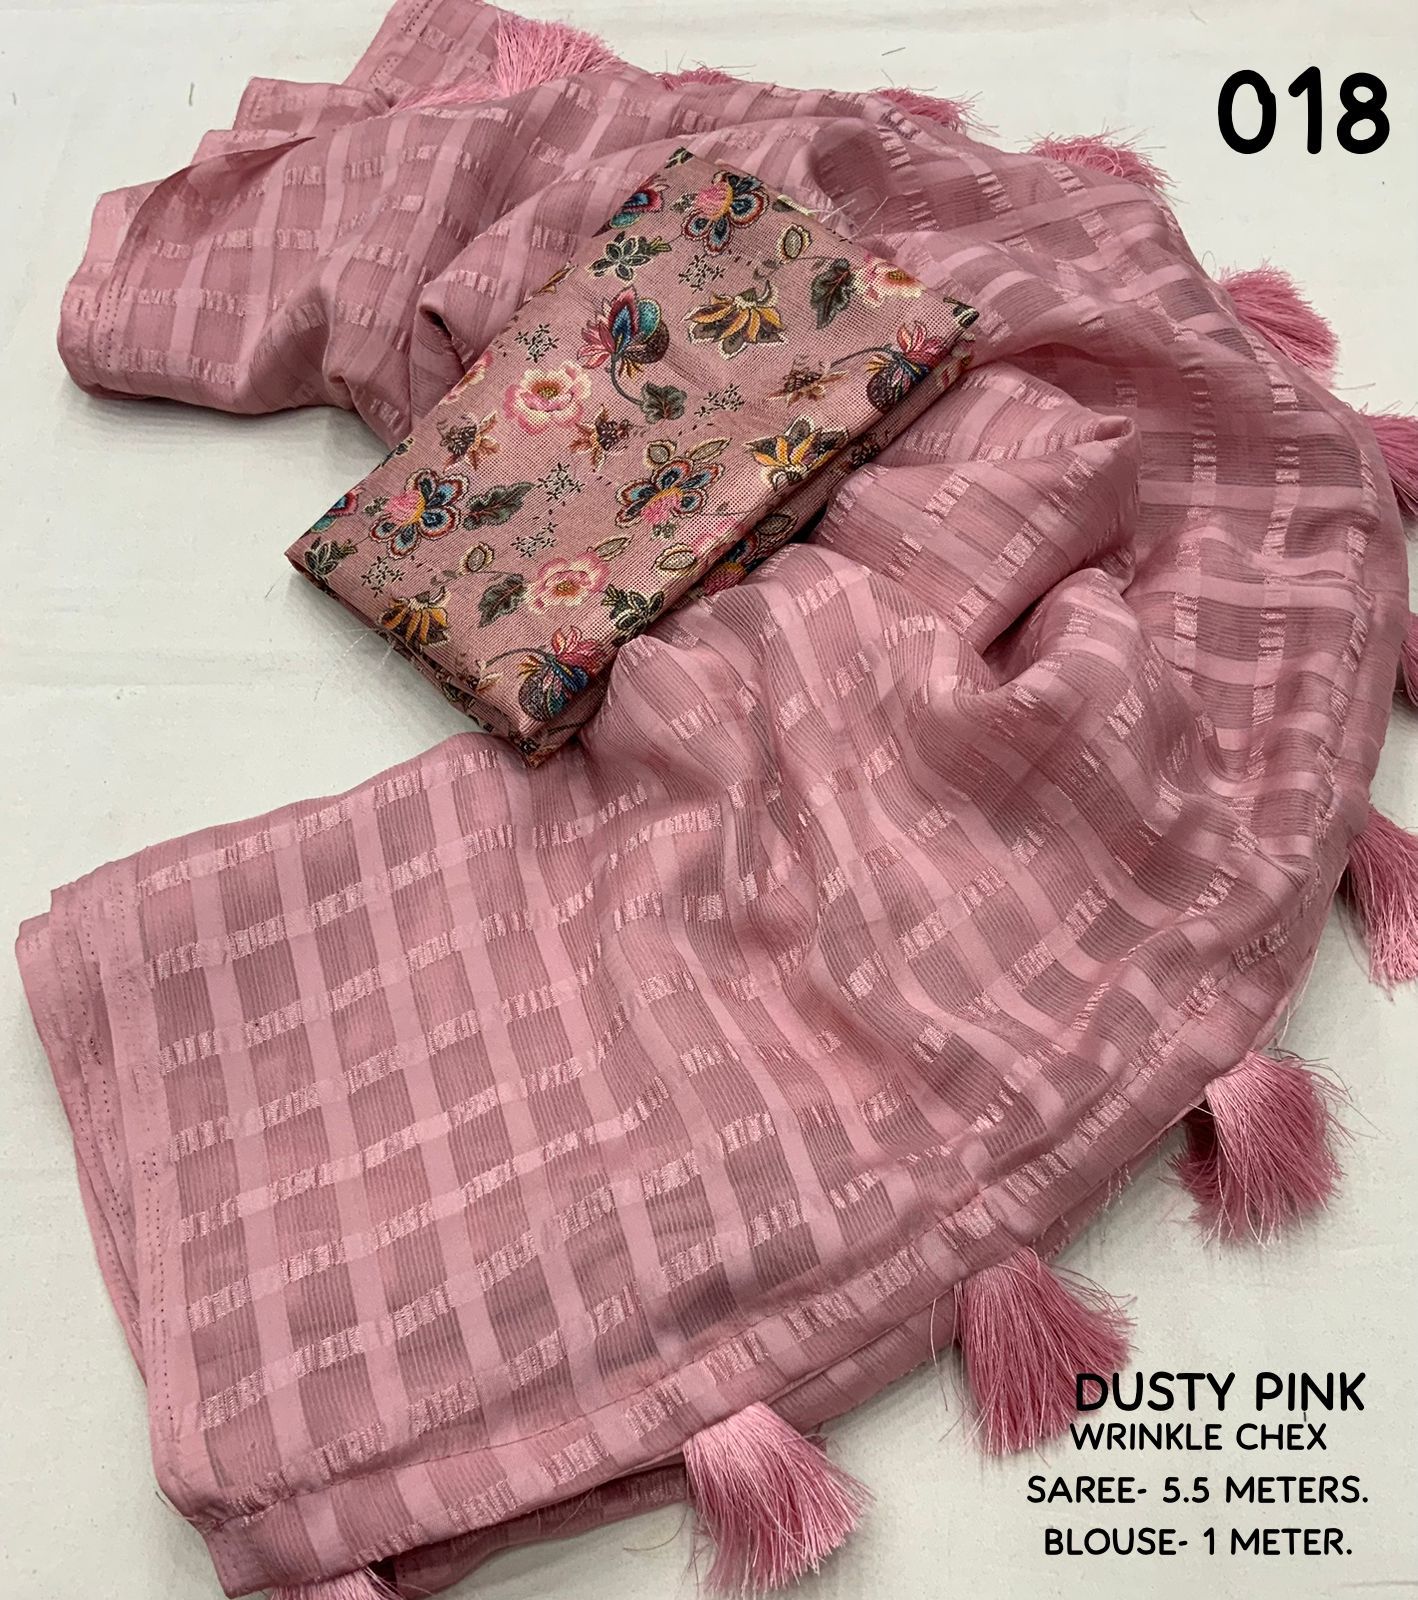 AK- WRINKLE CHEX DUSTY PINK SAREE